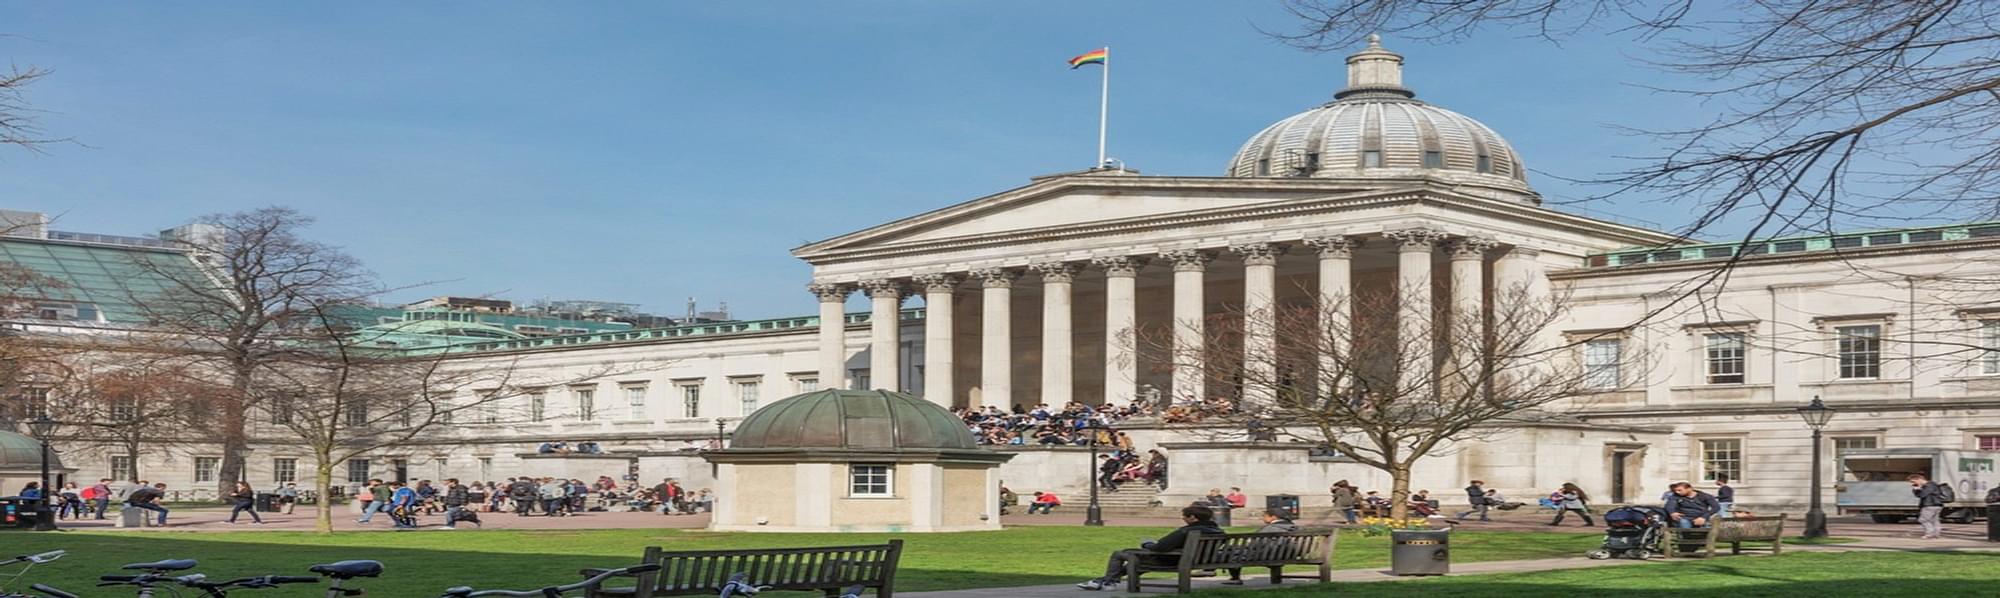 UCL Acceptance Rate For International Students CollegeLearners com